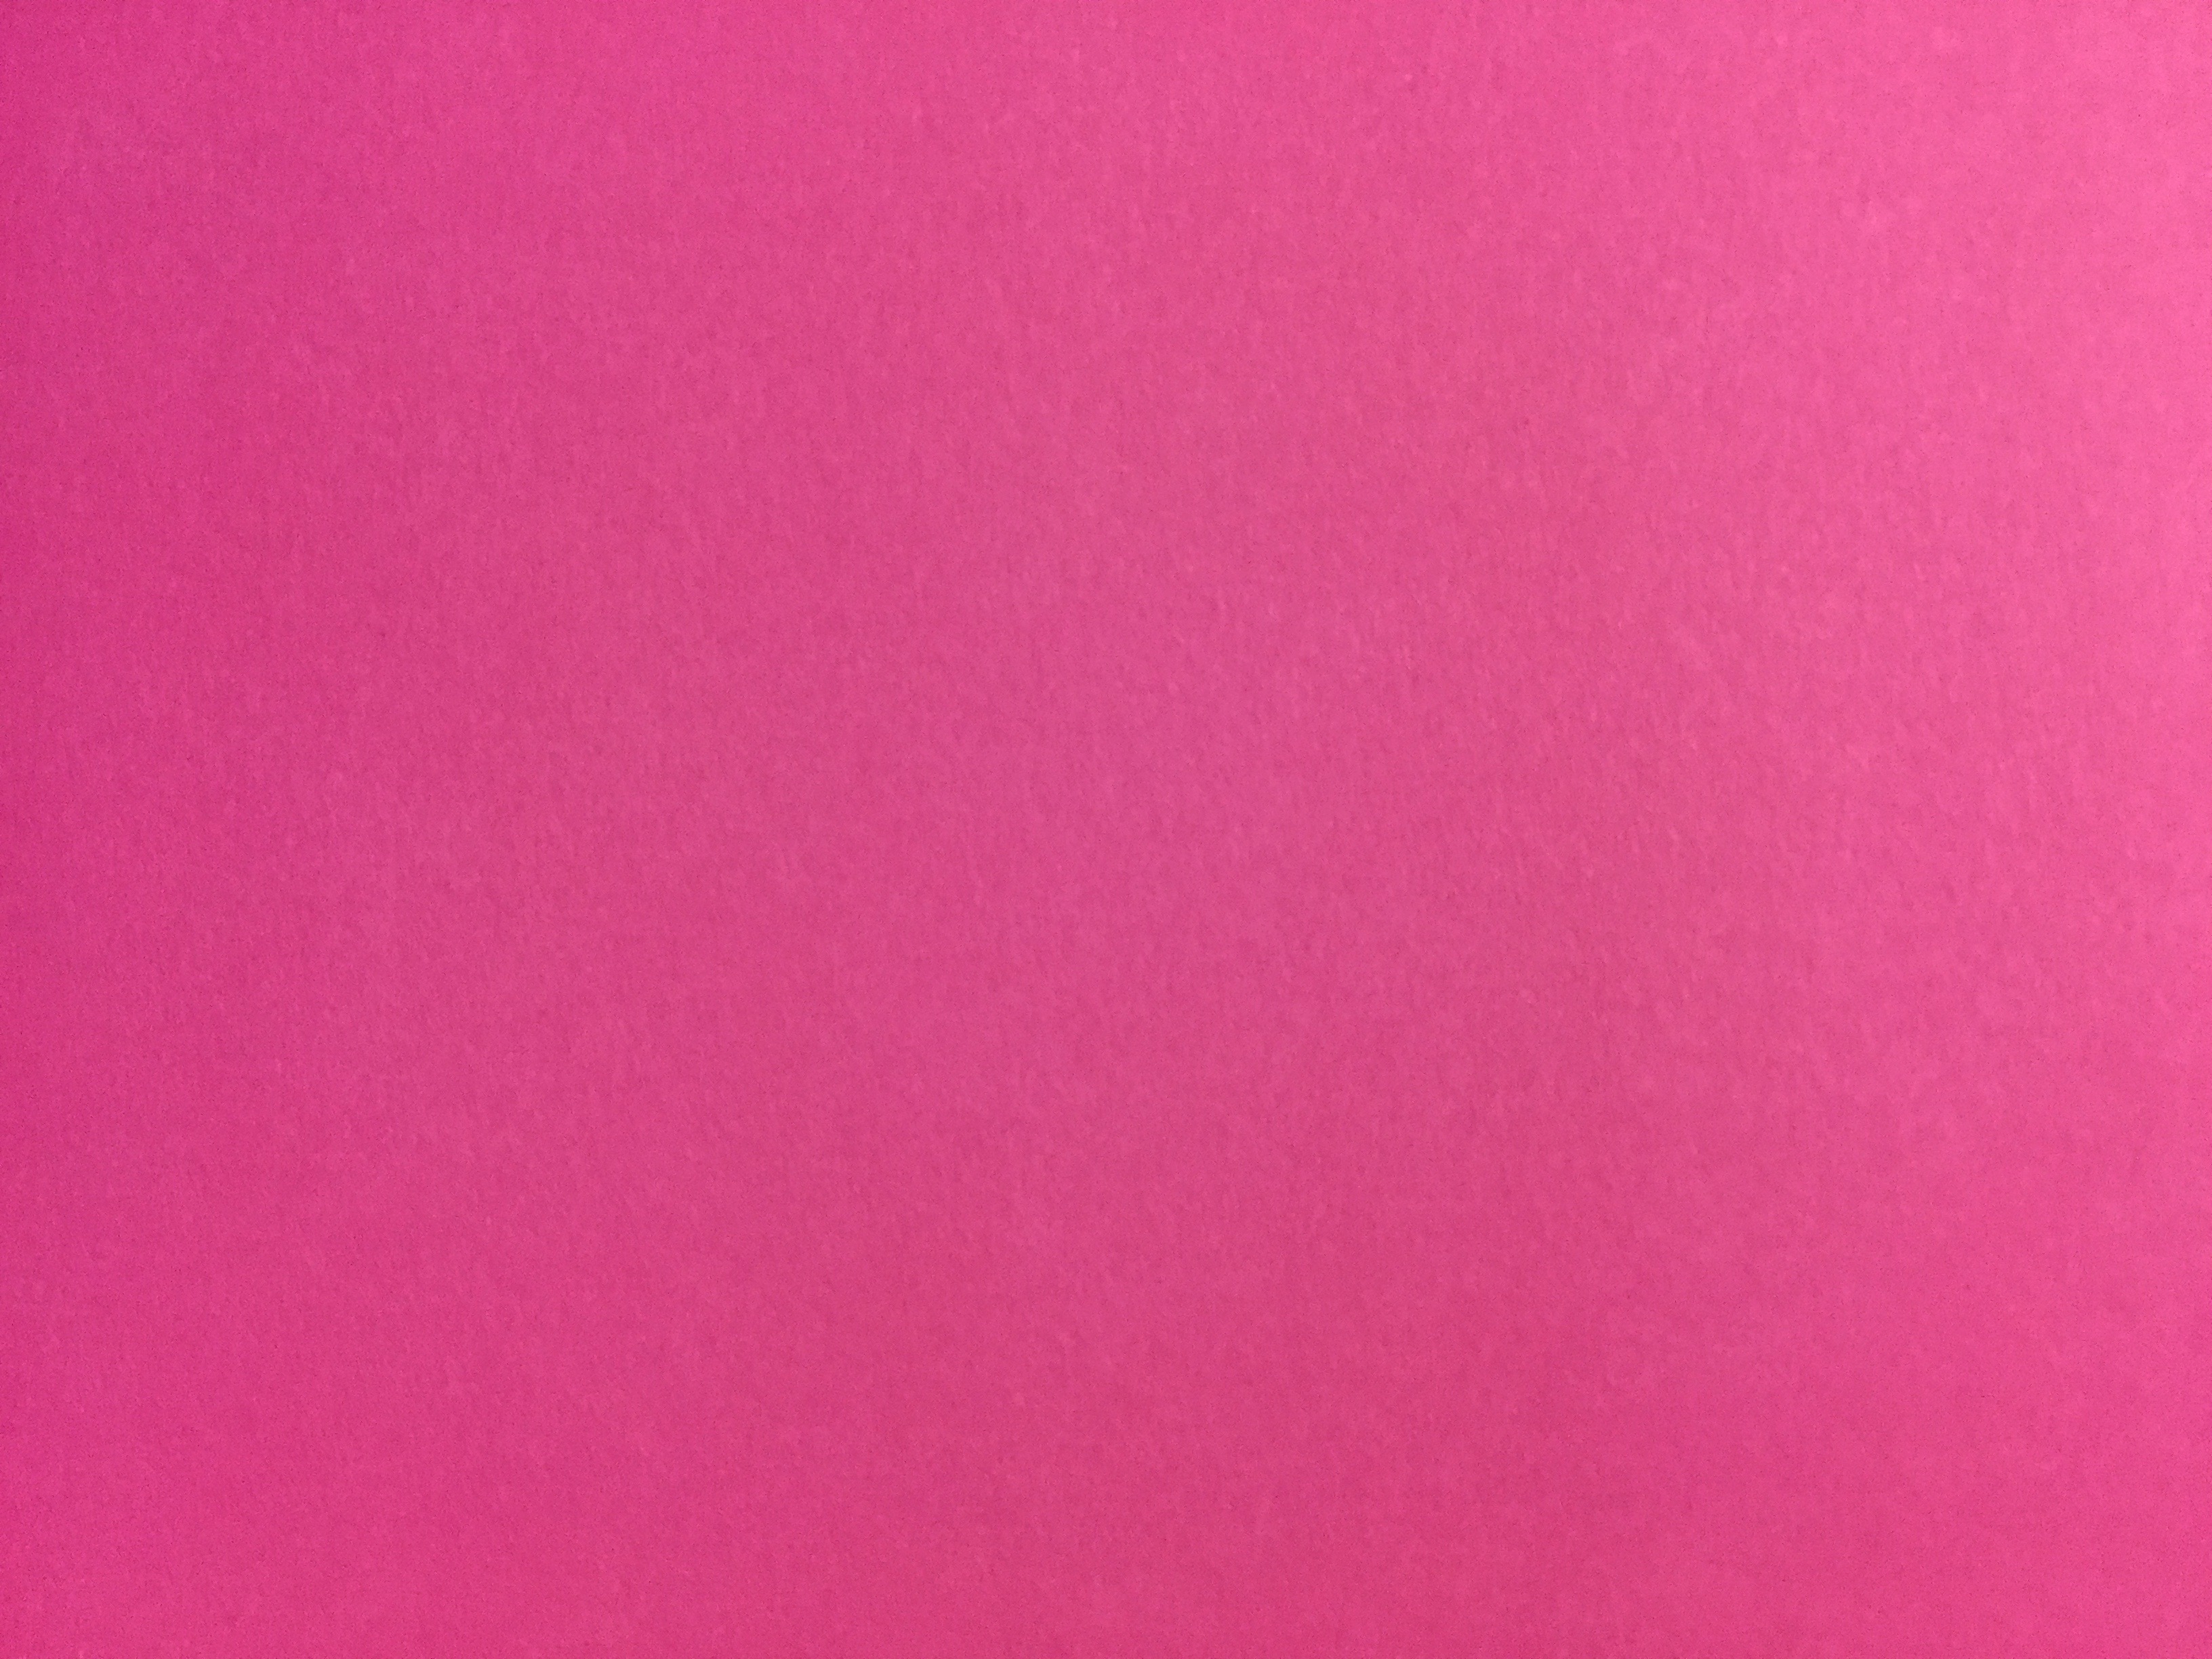 Bright Pink Paper Texture W Glossy Spots Free Textures